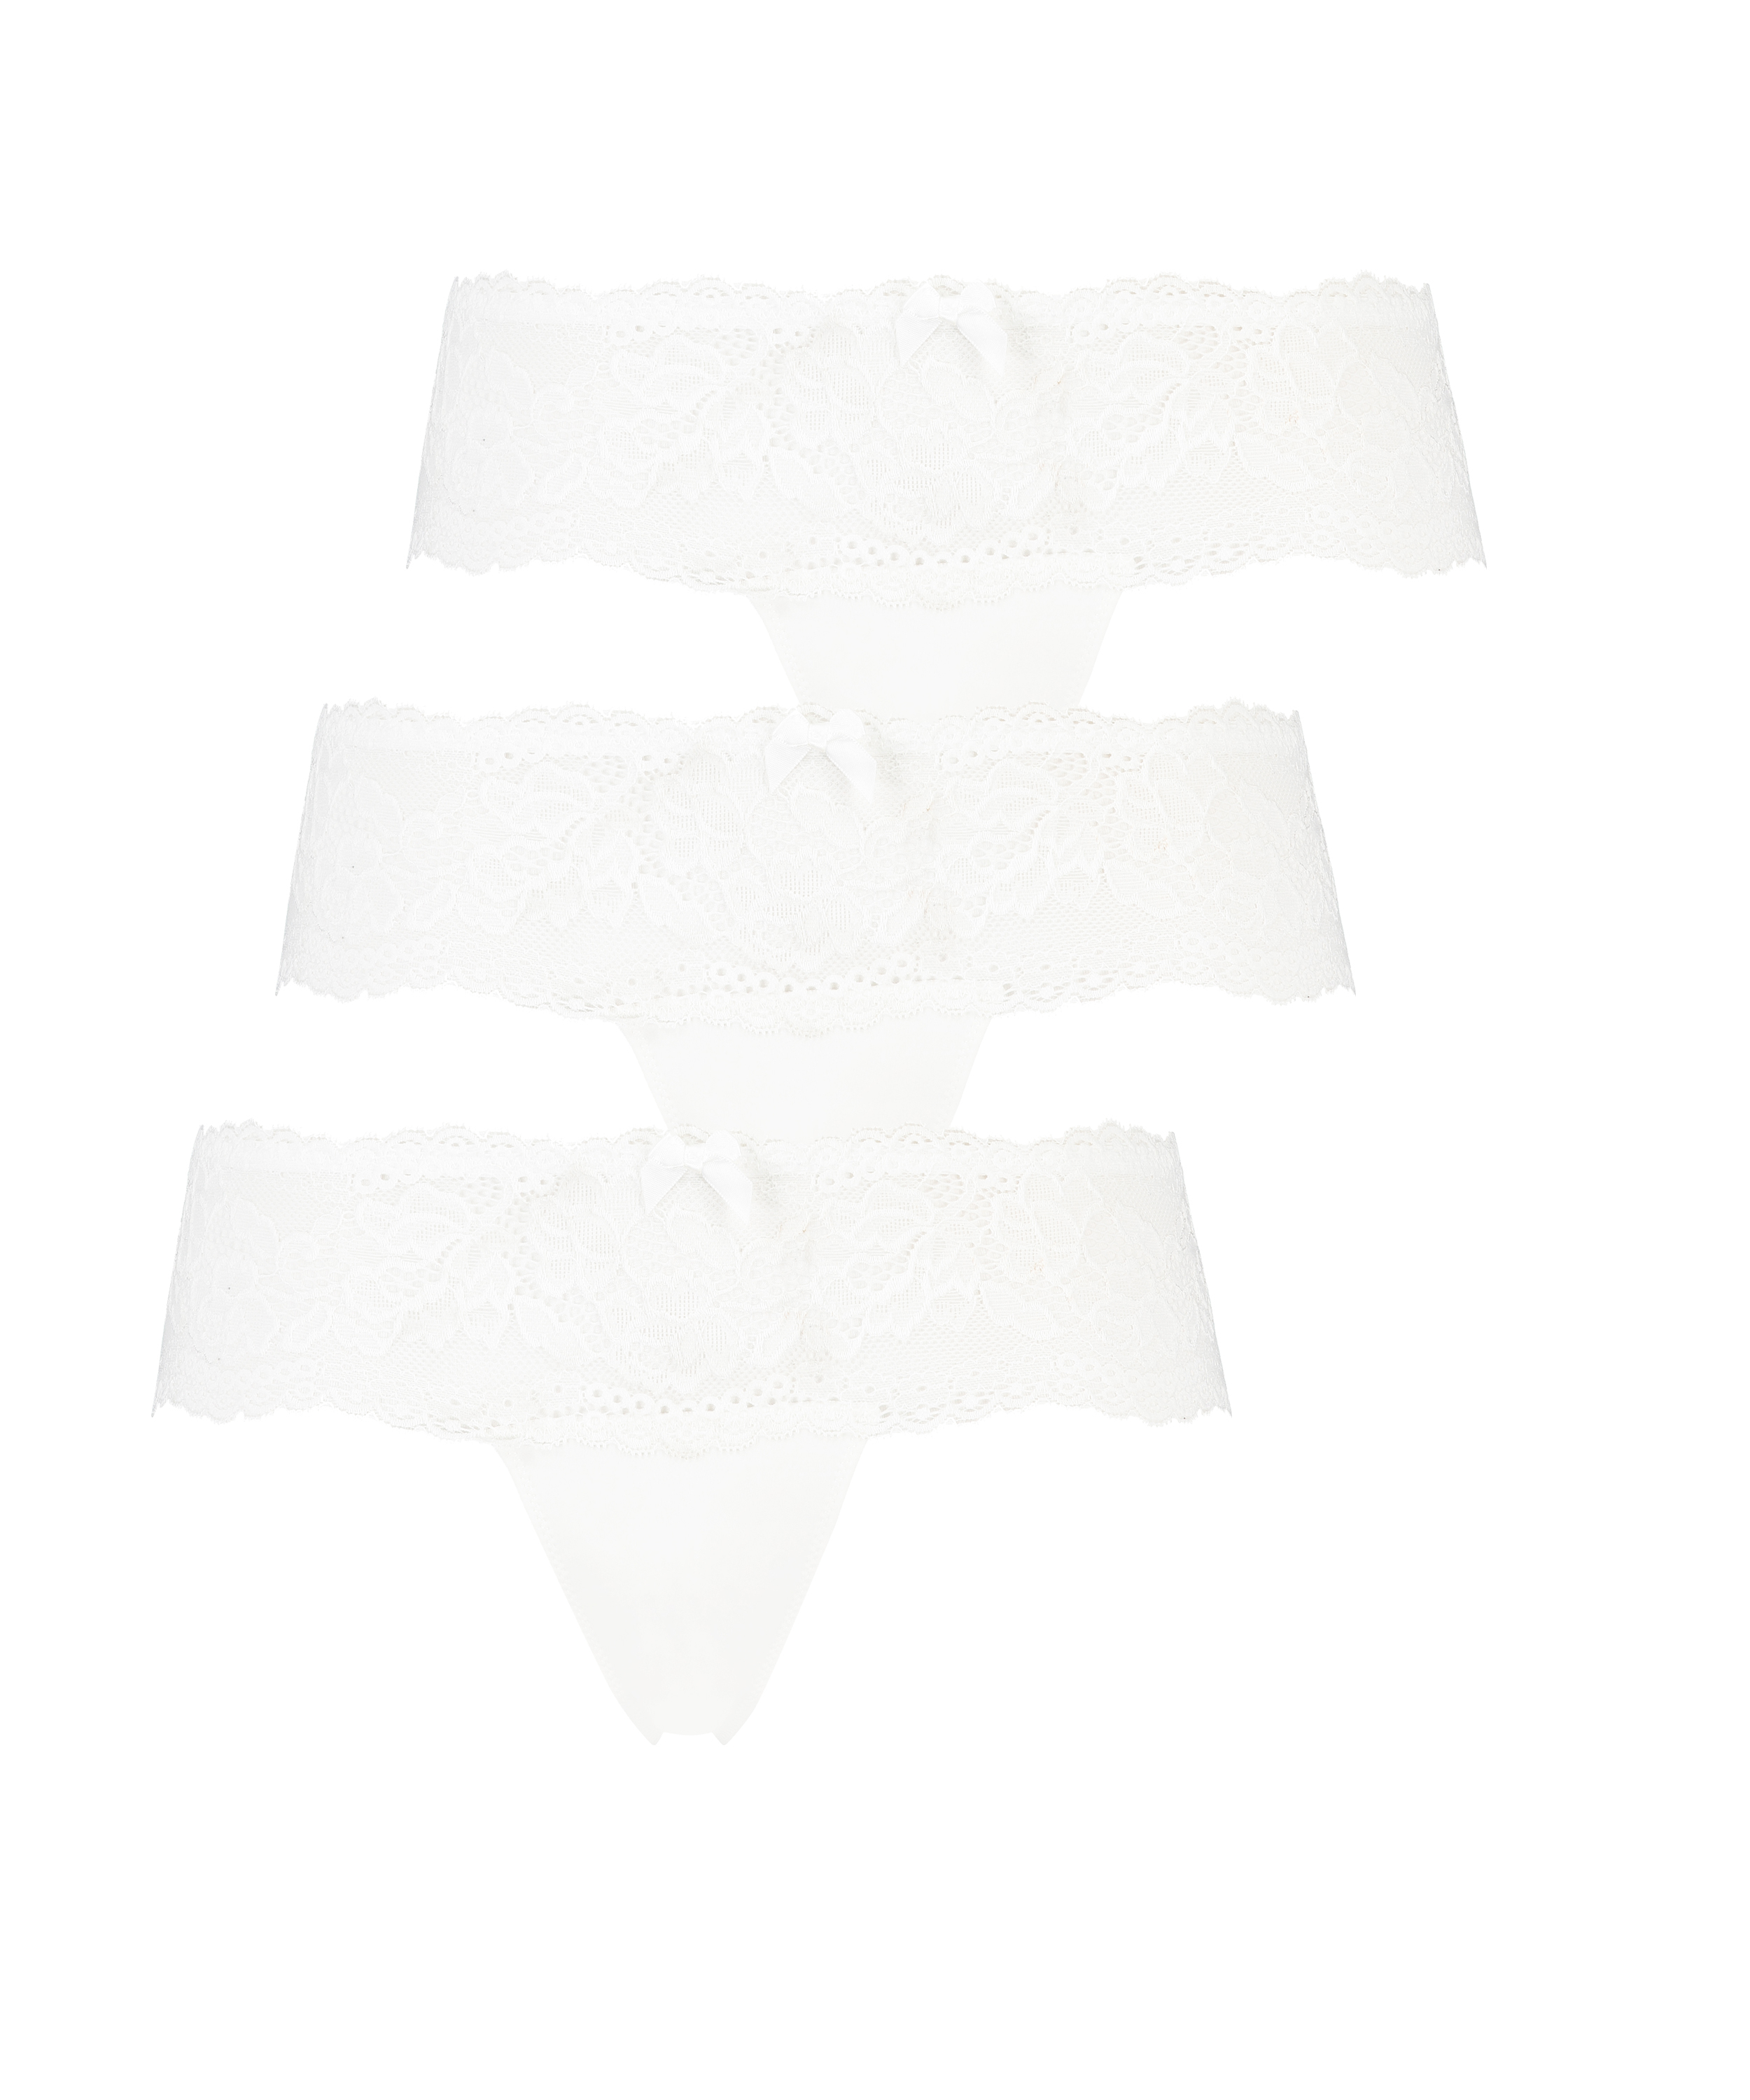 3er-Pack Boxerstrings Florence, Weiß, main